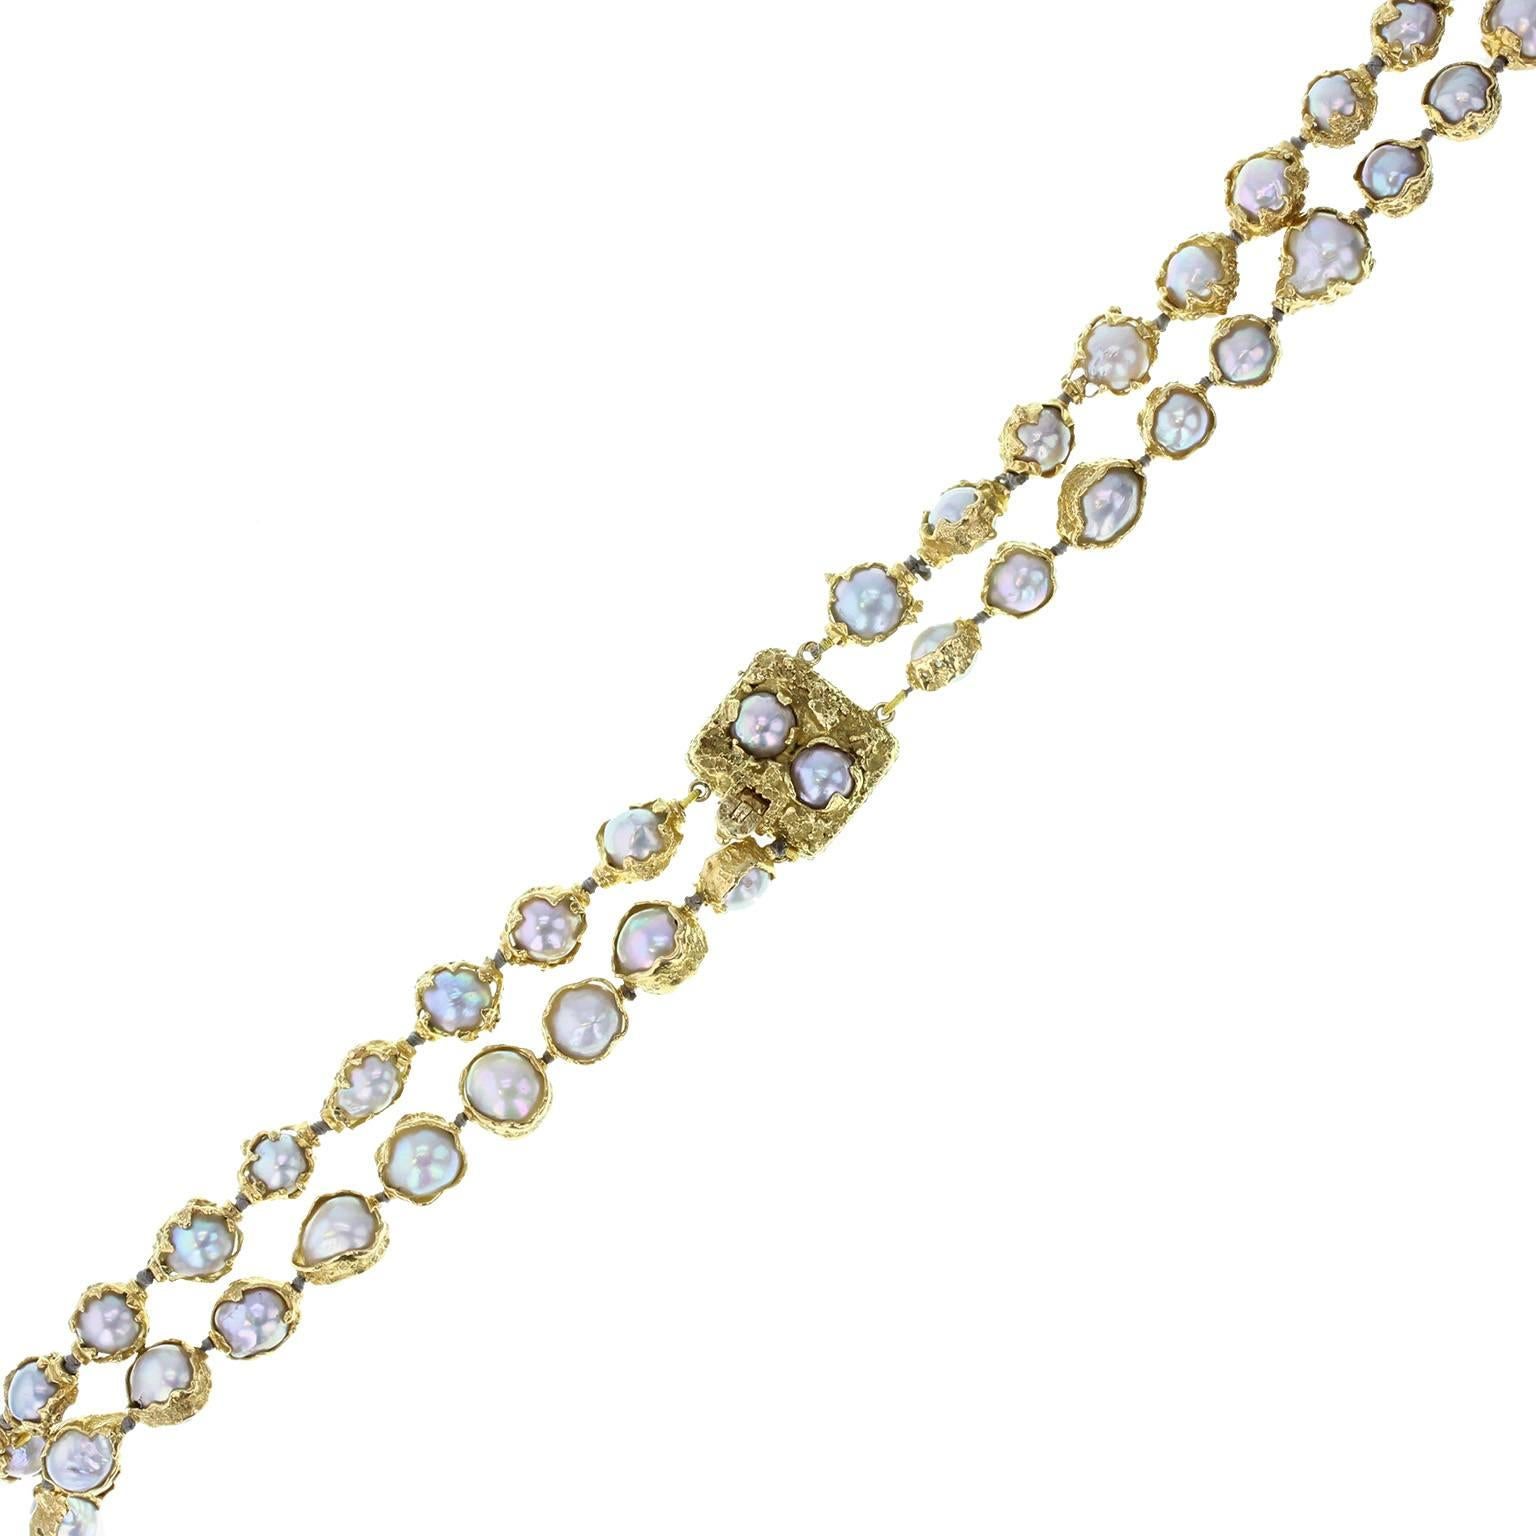 An exquisite, impressive and instantly recognisable necklace by Charles de Temple. Featuring a double row of grey pearls, each encapsulated in a stylised gold frame and strung and knotted on grey silk thread. Pearl set gold clasp. Signed 'CdeT' with